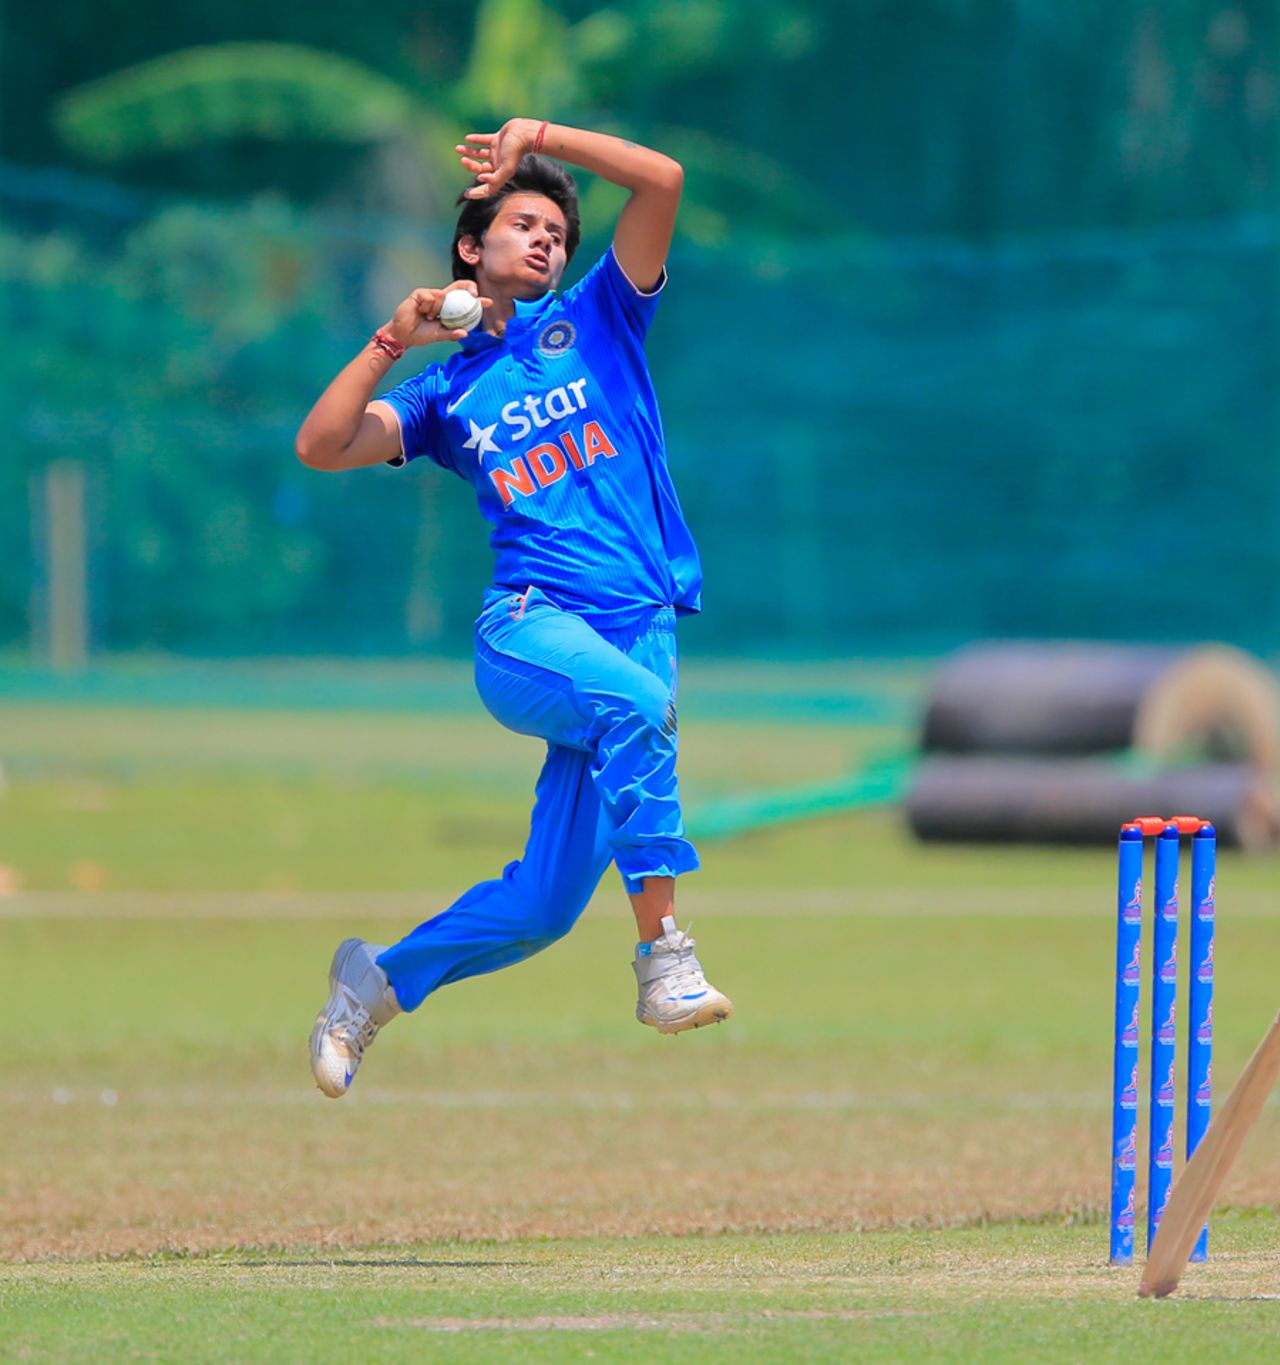 Mansi Joshi sizes up her target at the loading, India Women v Bangladesh Women, ICC Women's World Cup Qualifier, Colombo, February 17, 2017